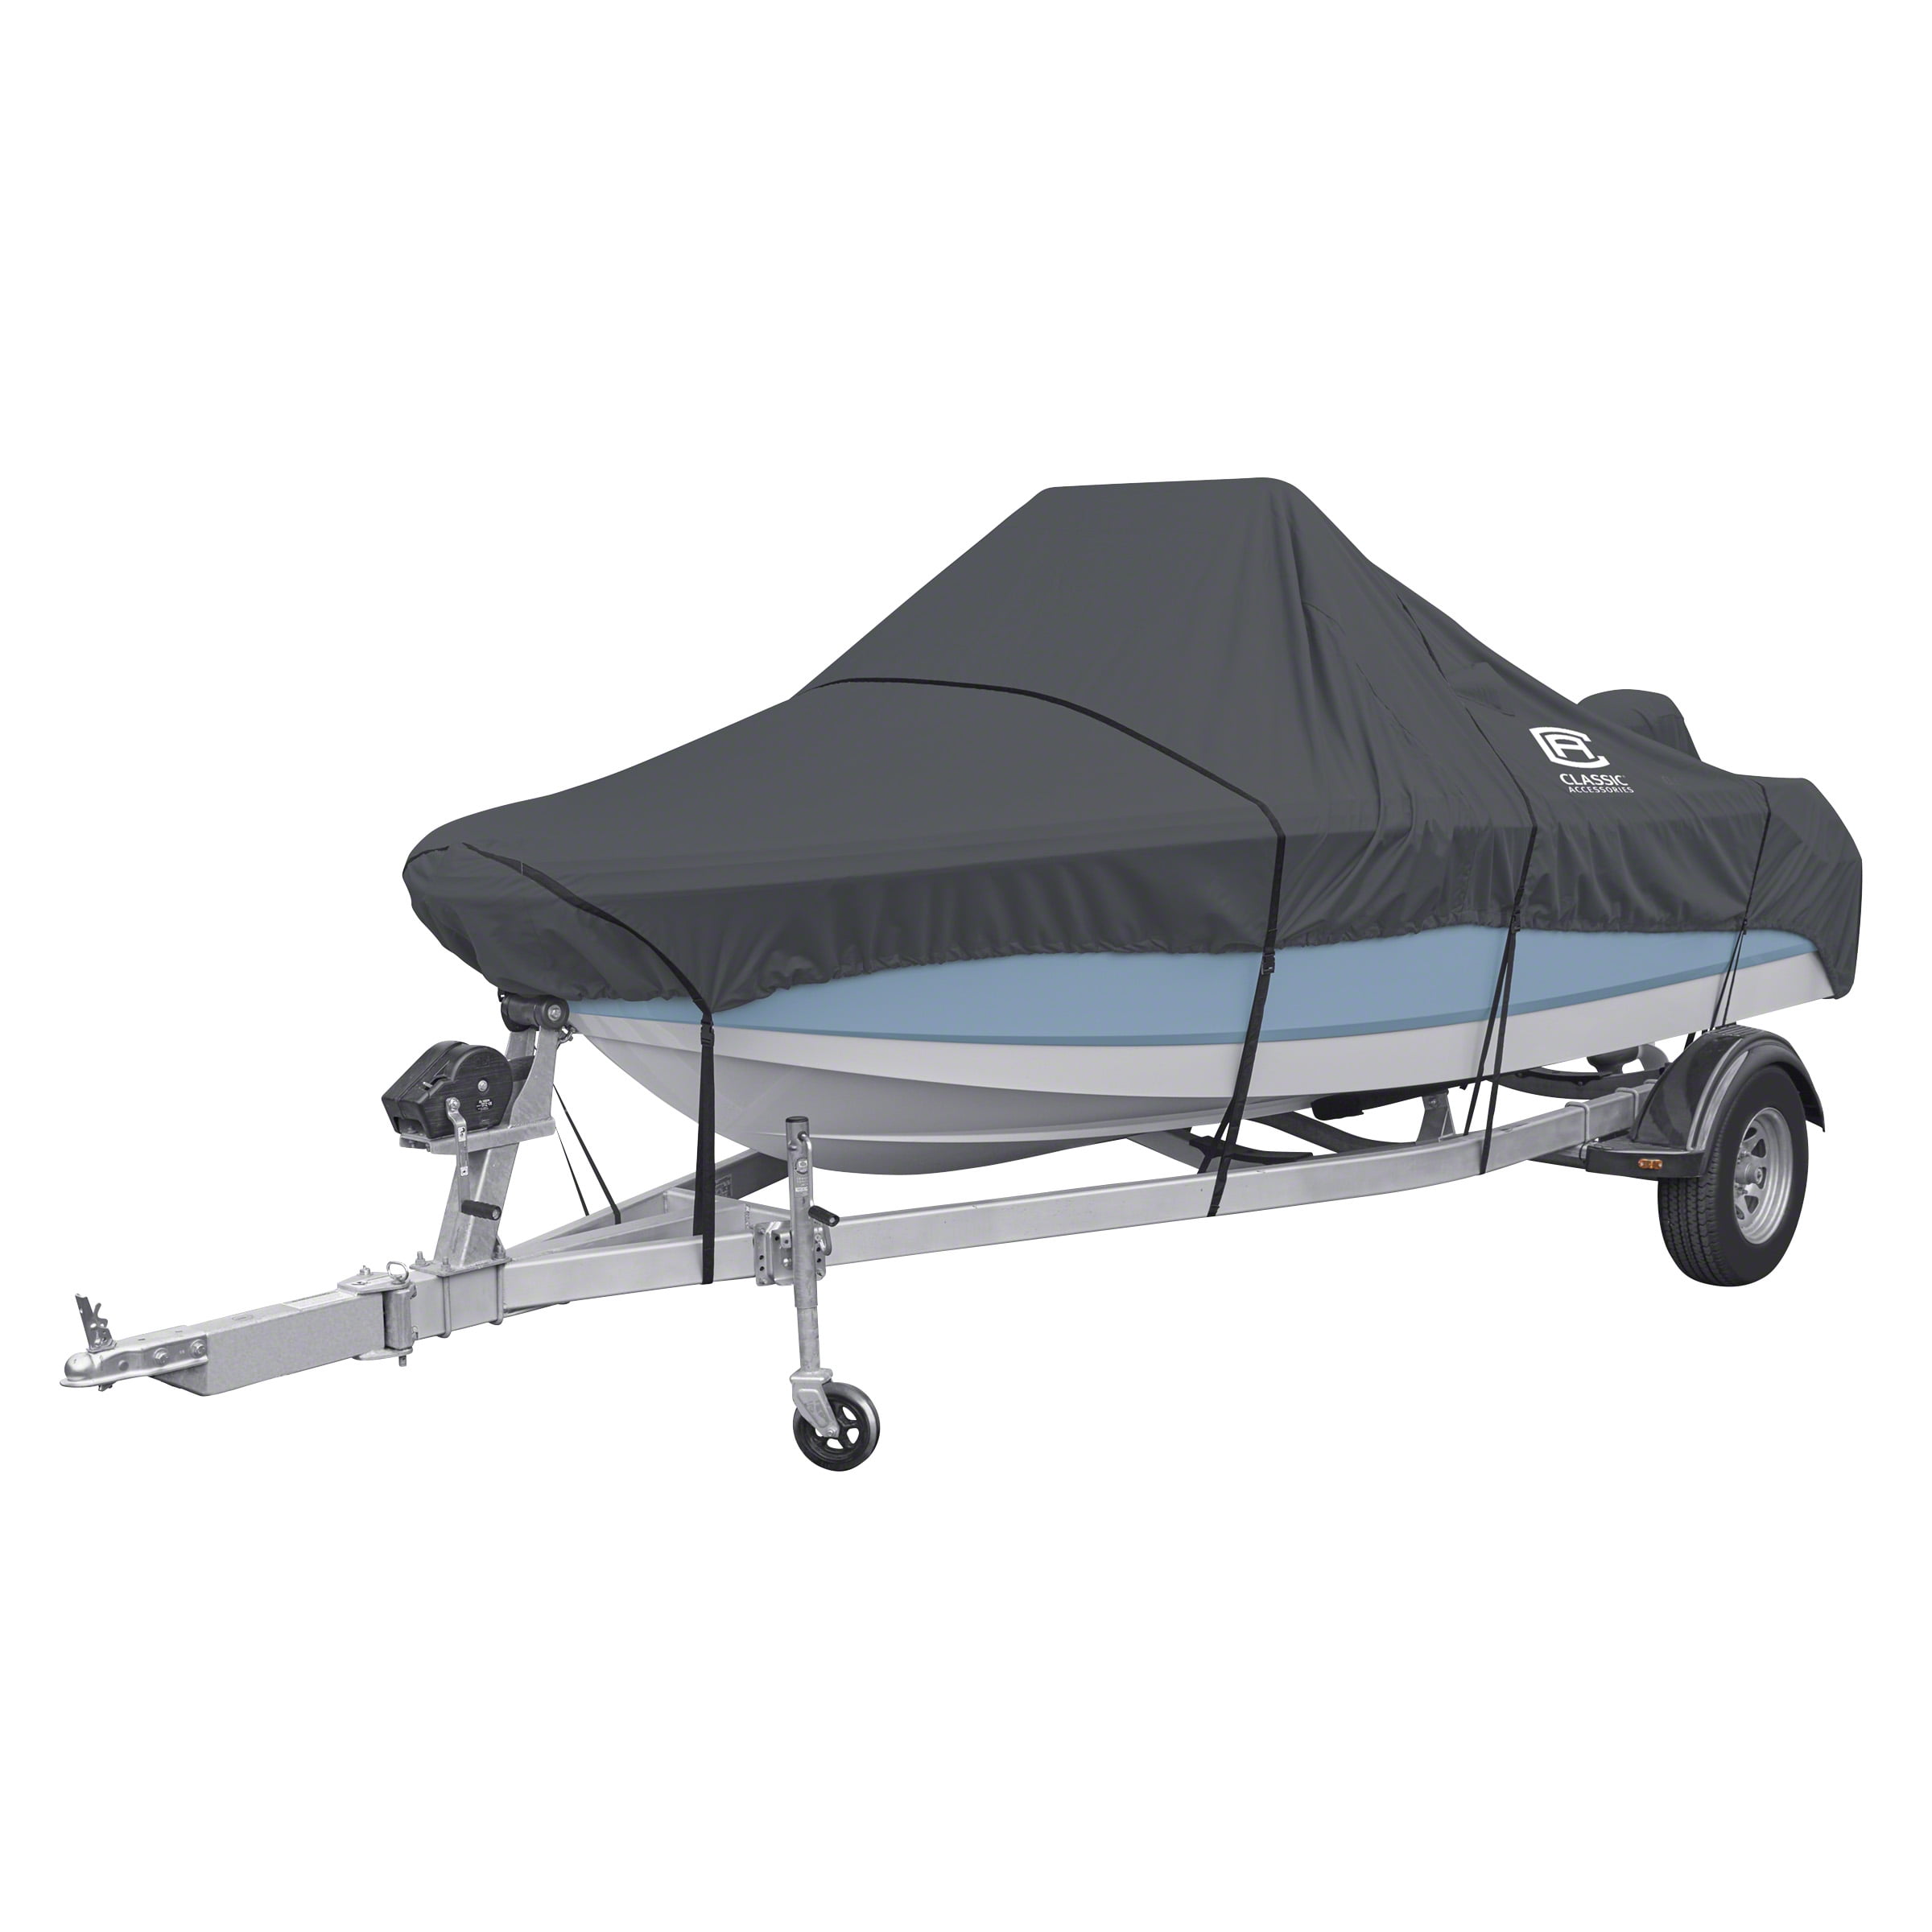 Classic Accessories Stormpro Heavy-duty Center Console Boat Cover Fits Boats 20 - 22 Ft Long X 106 In Wide - Walmartcom